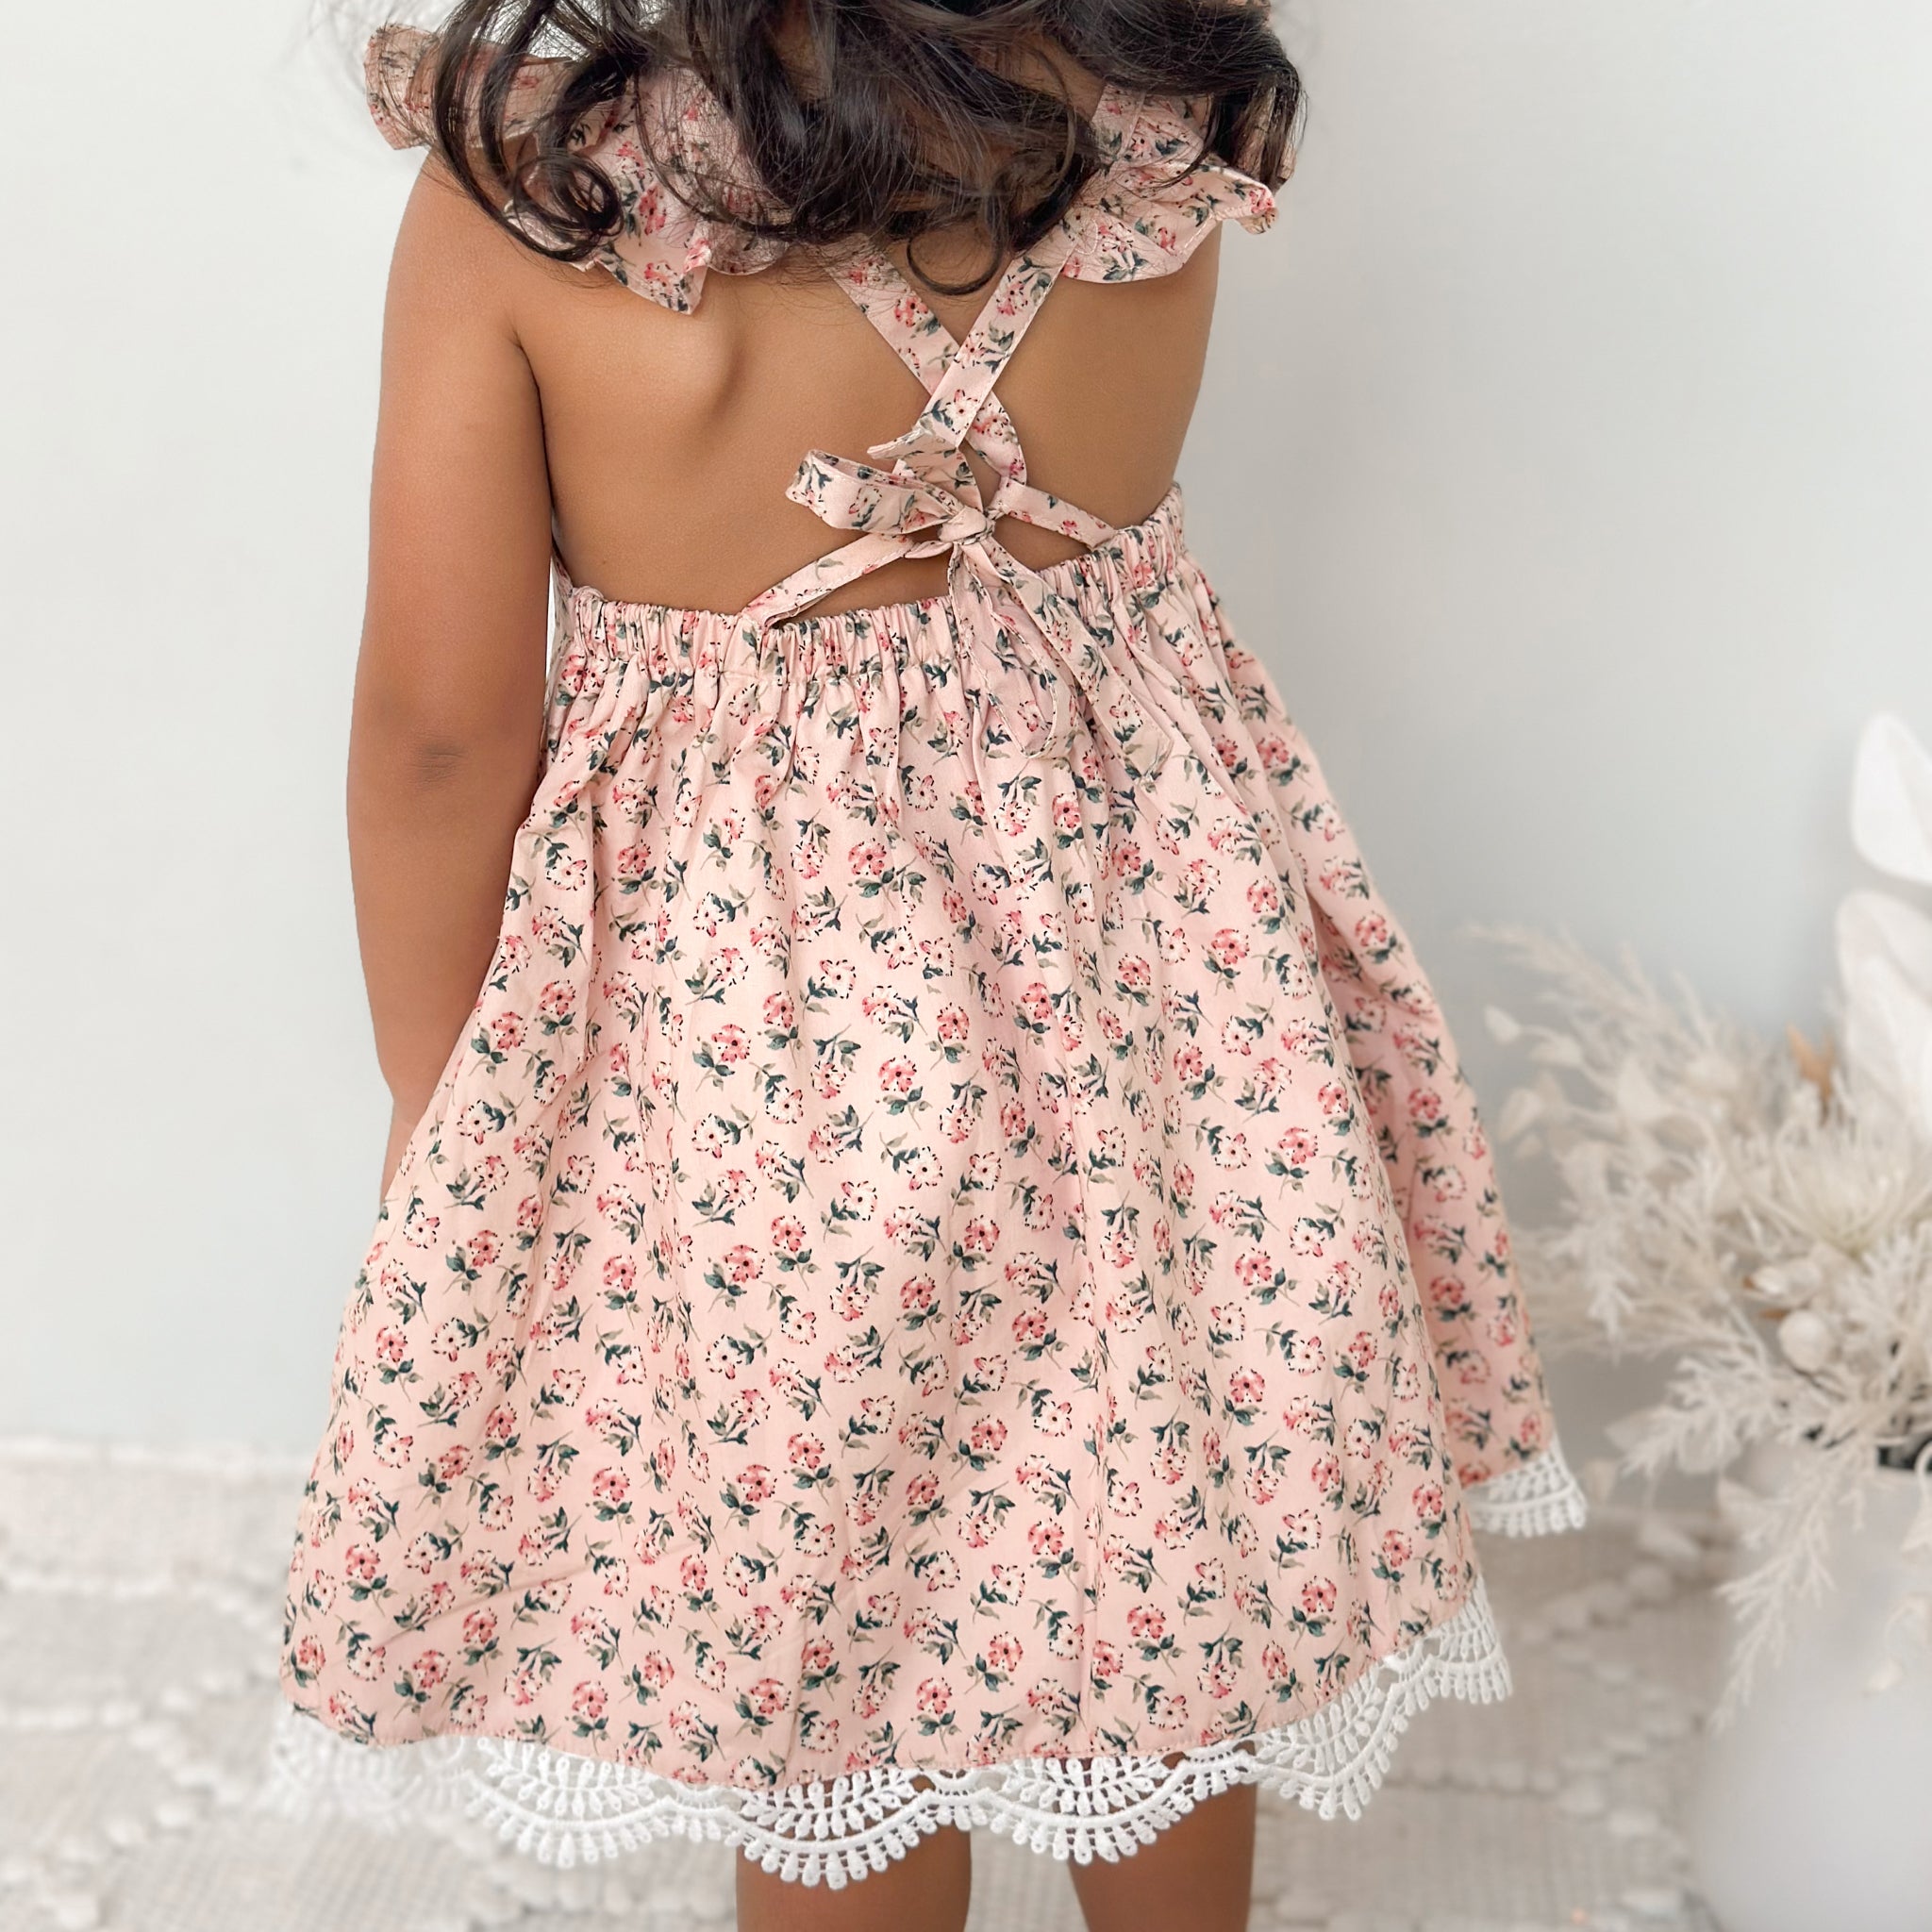 Sweetheart Dress - Connie